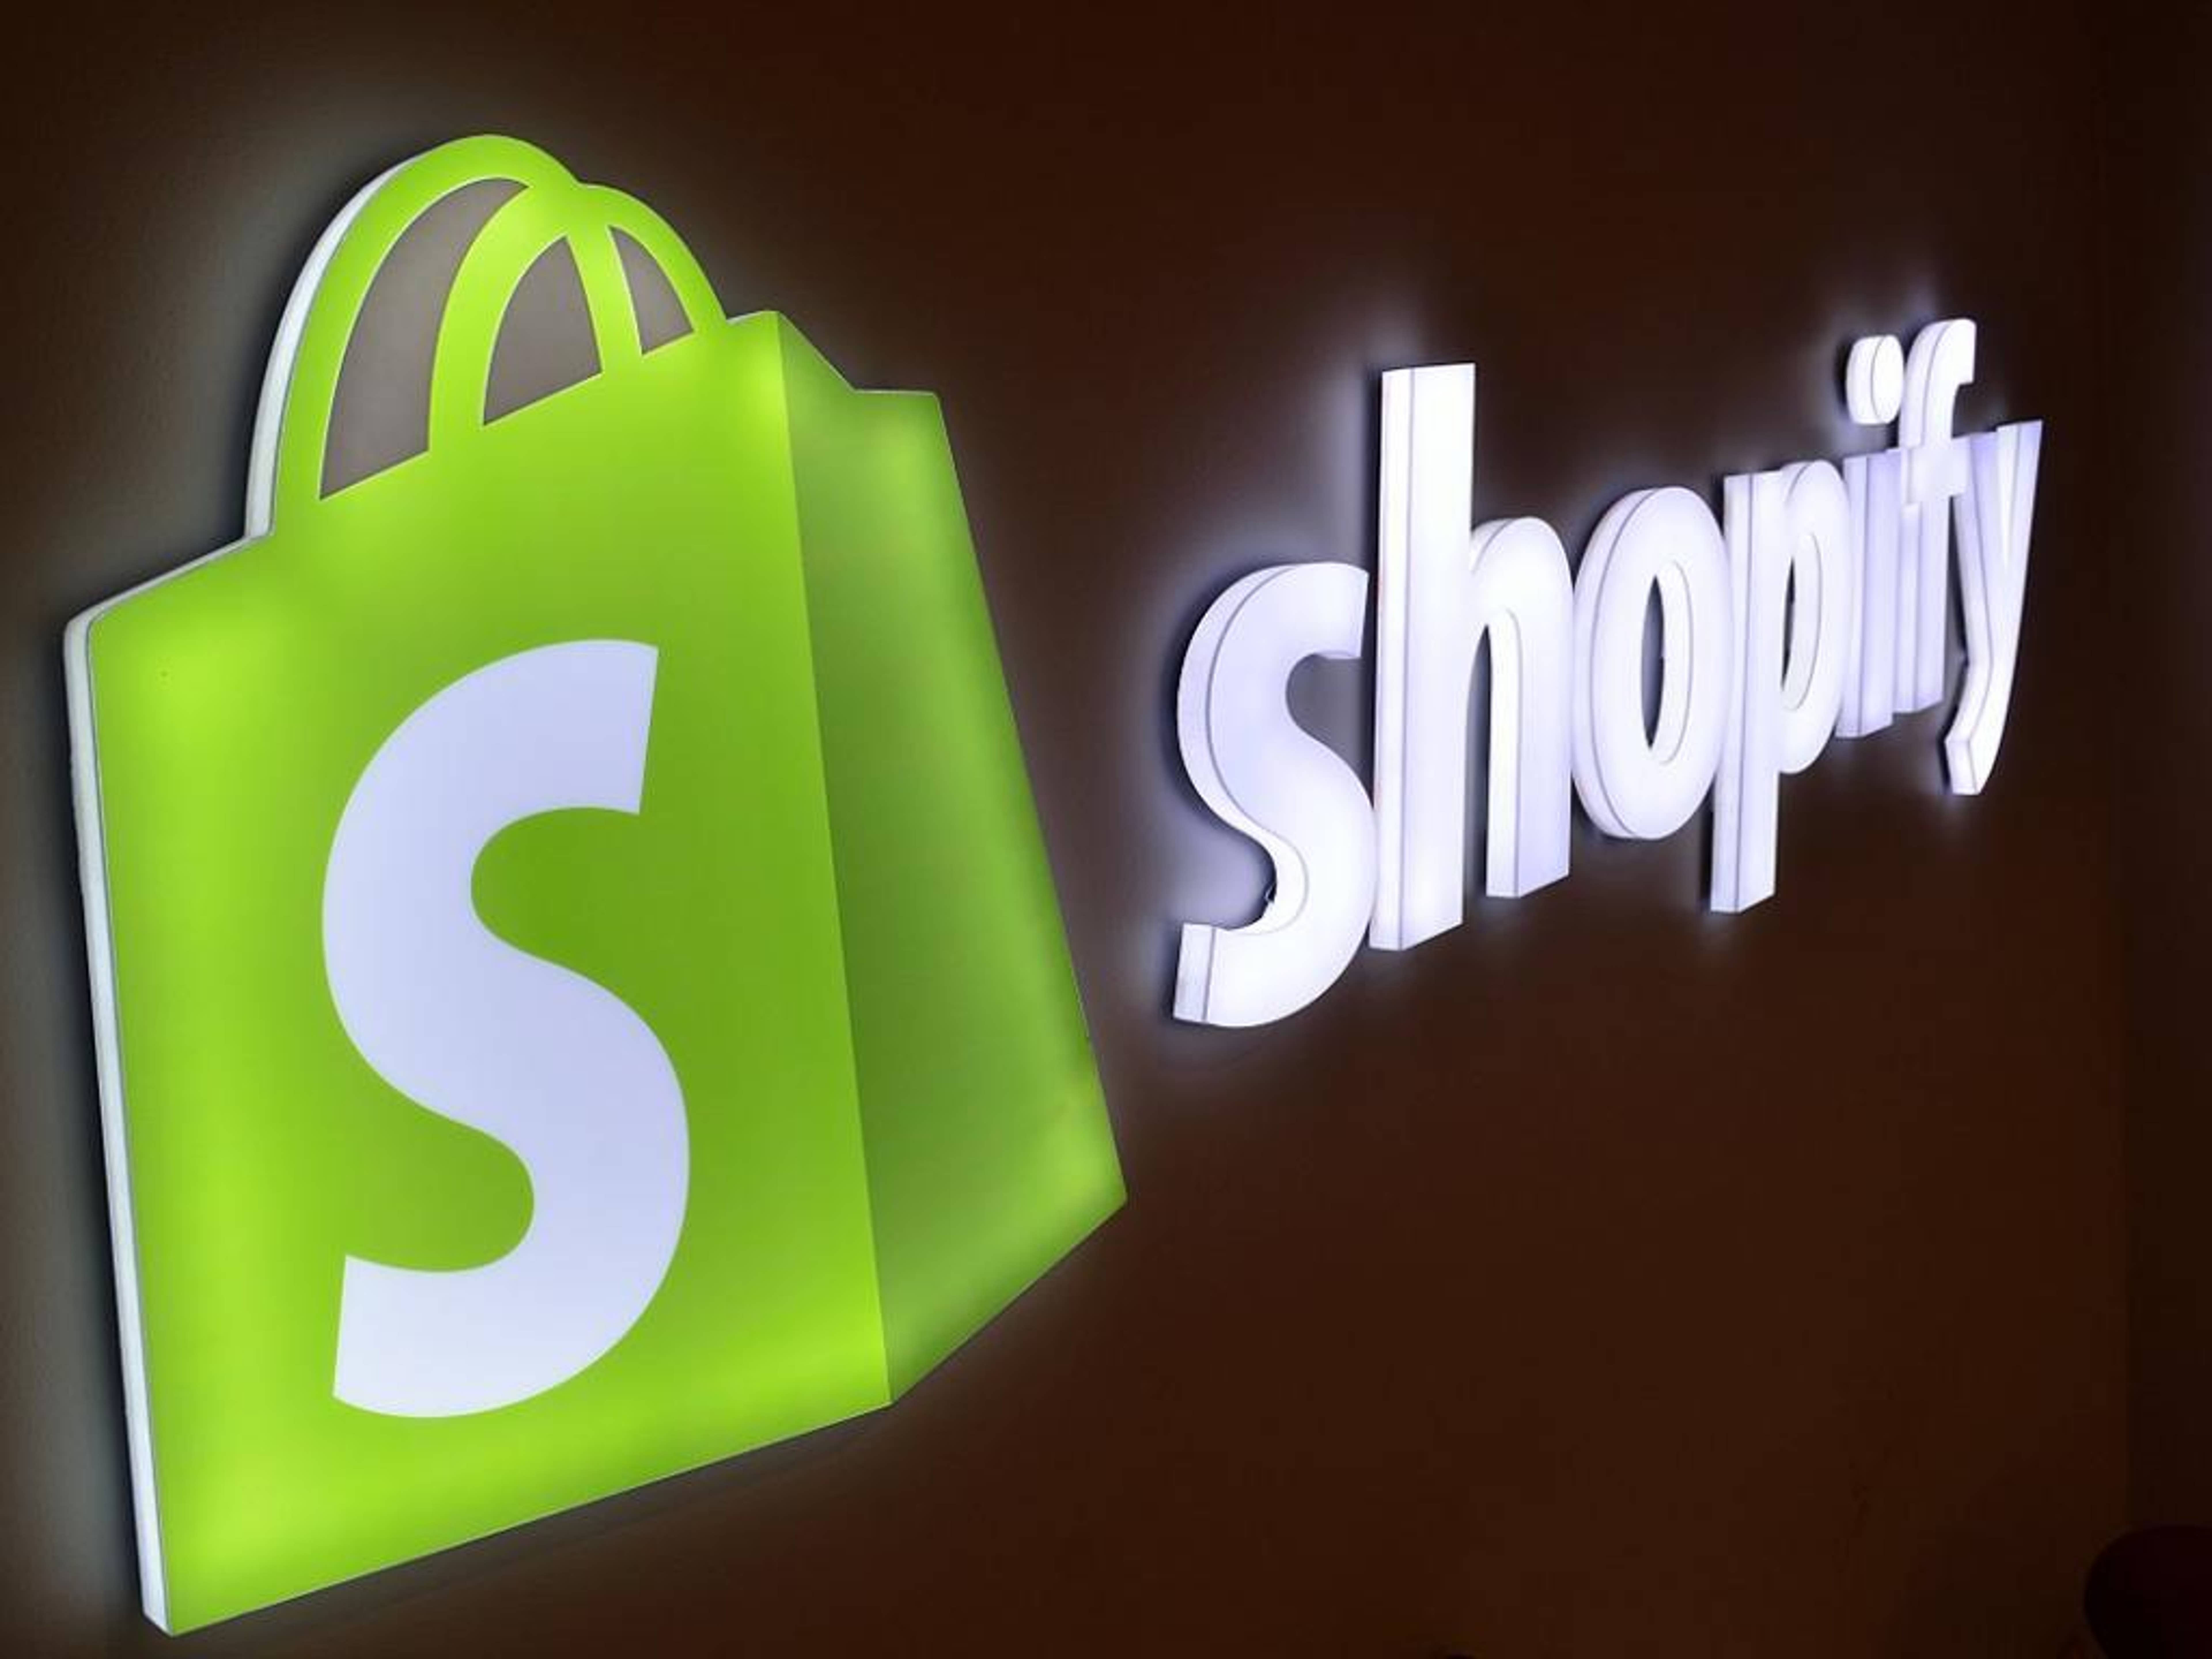 Shopify&#39;s Stock Is Testing A Key Technical Level